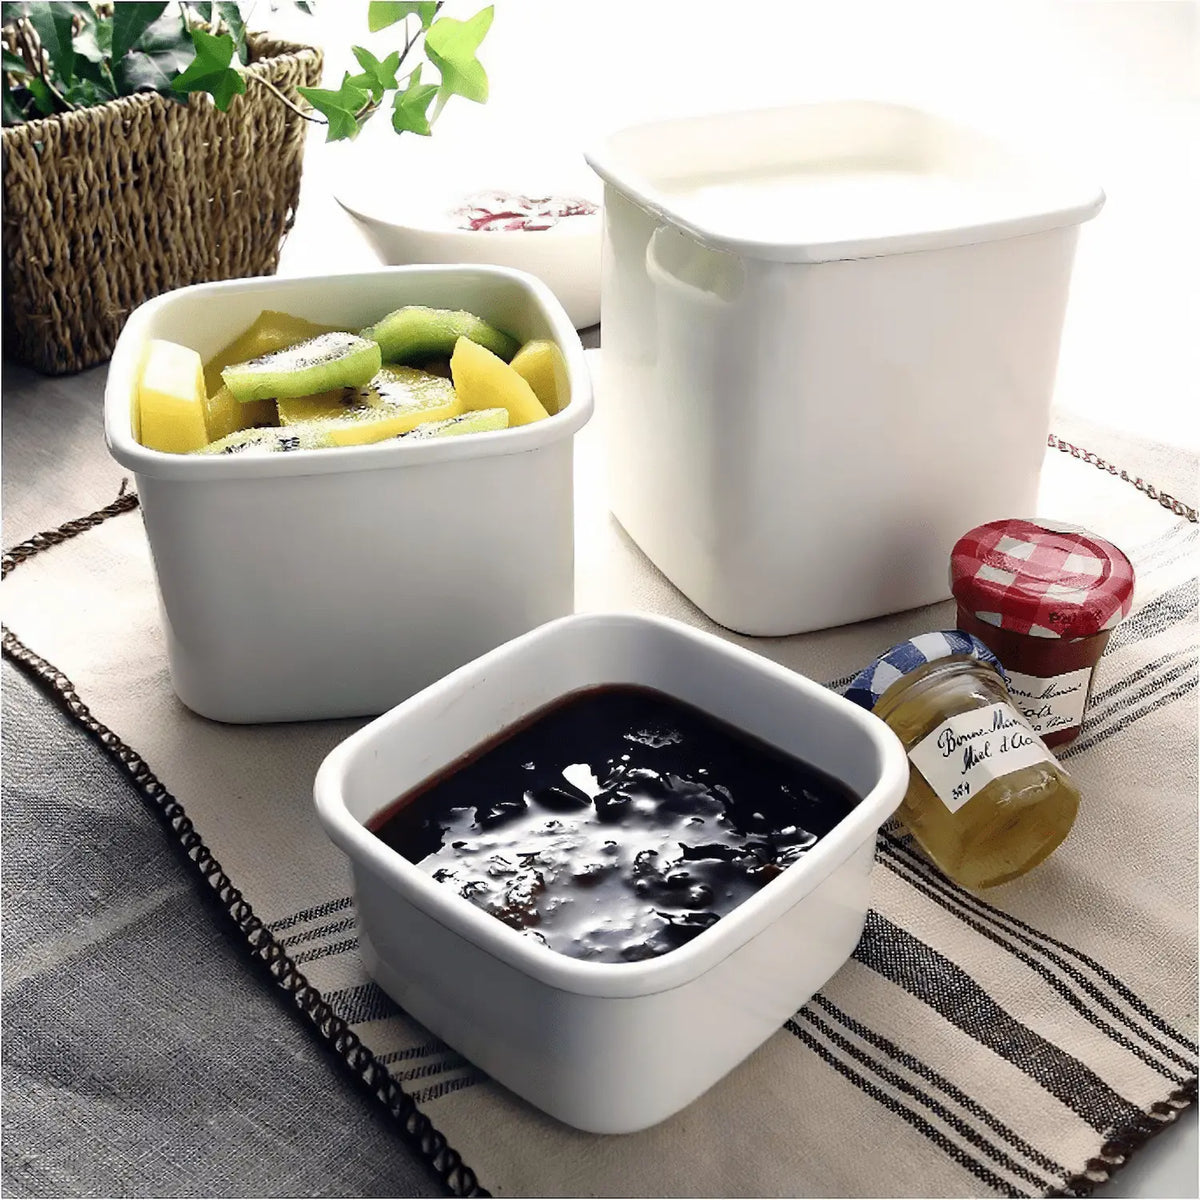 Noda Horo White Series Enamel Square Food Containers with Lid